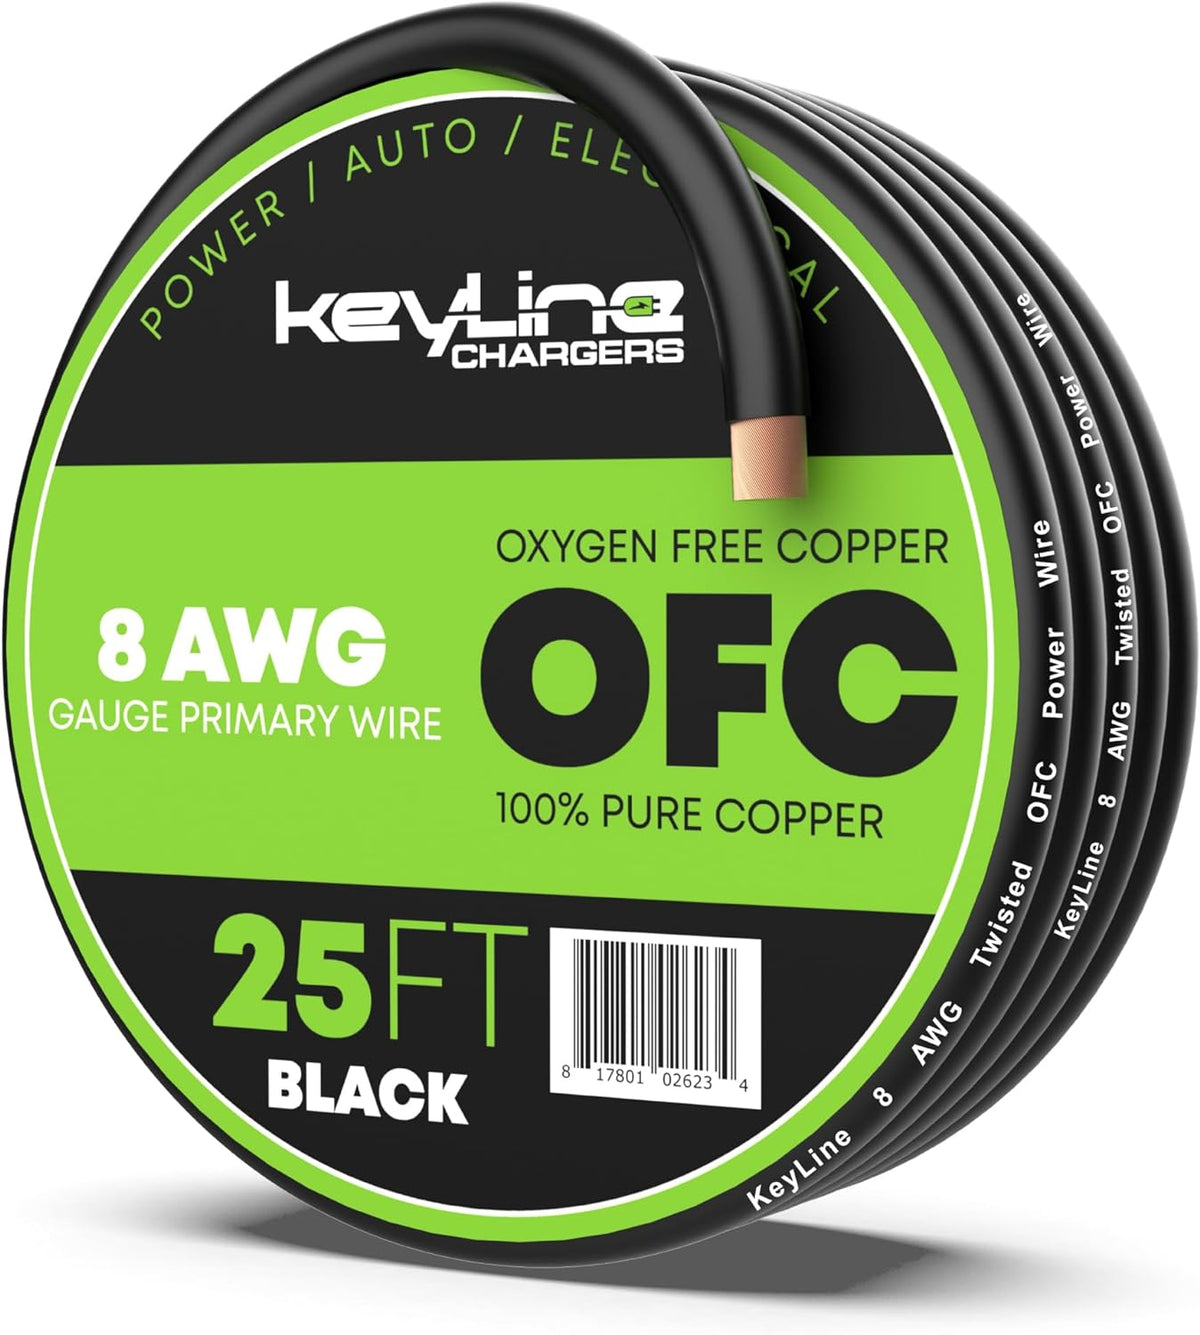 8 Gauge Wire - 25ft Black | 8 Gauge Amp Wire, Battery Cable, Marine Speaker Wire, Solar Cables for RV Trailer, Car Audio Speaker Cable, 8 AWG Automotive Wire Oxygen Free Copper (OFC)